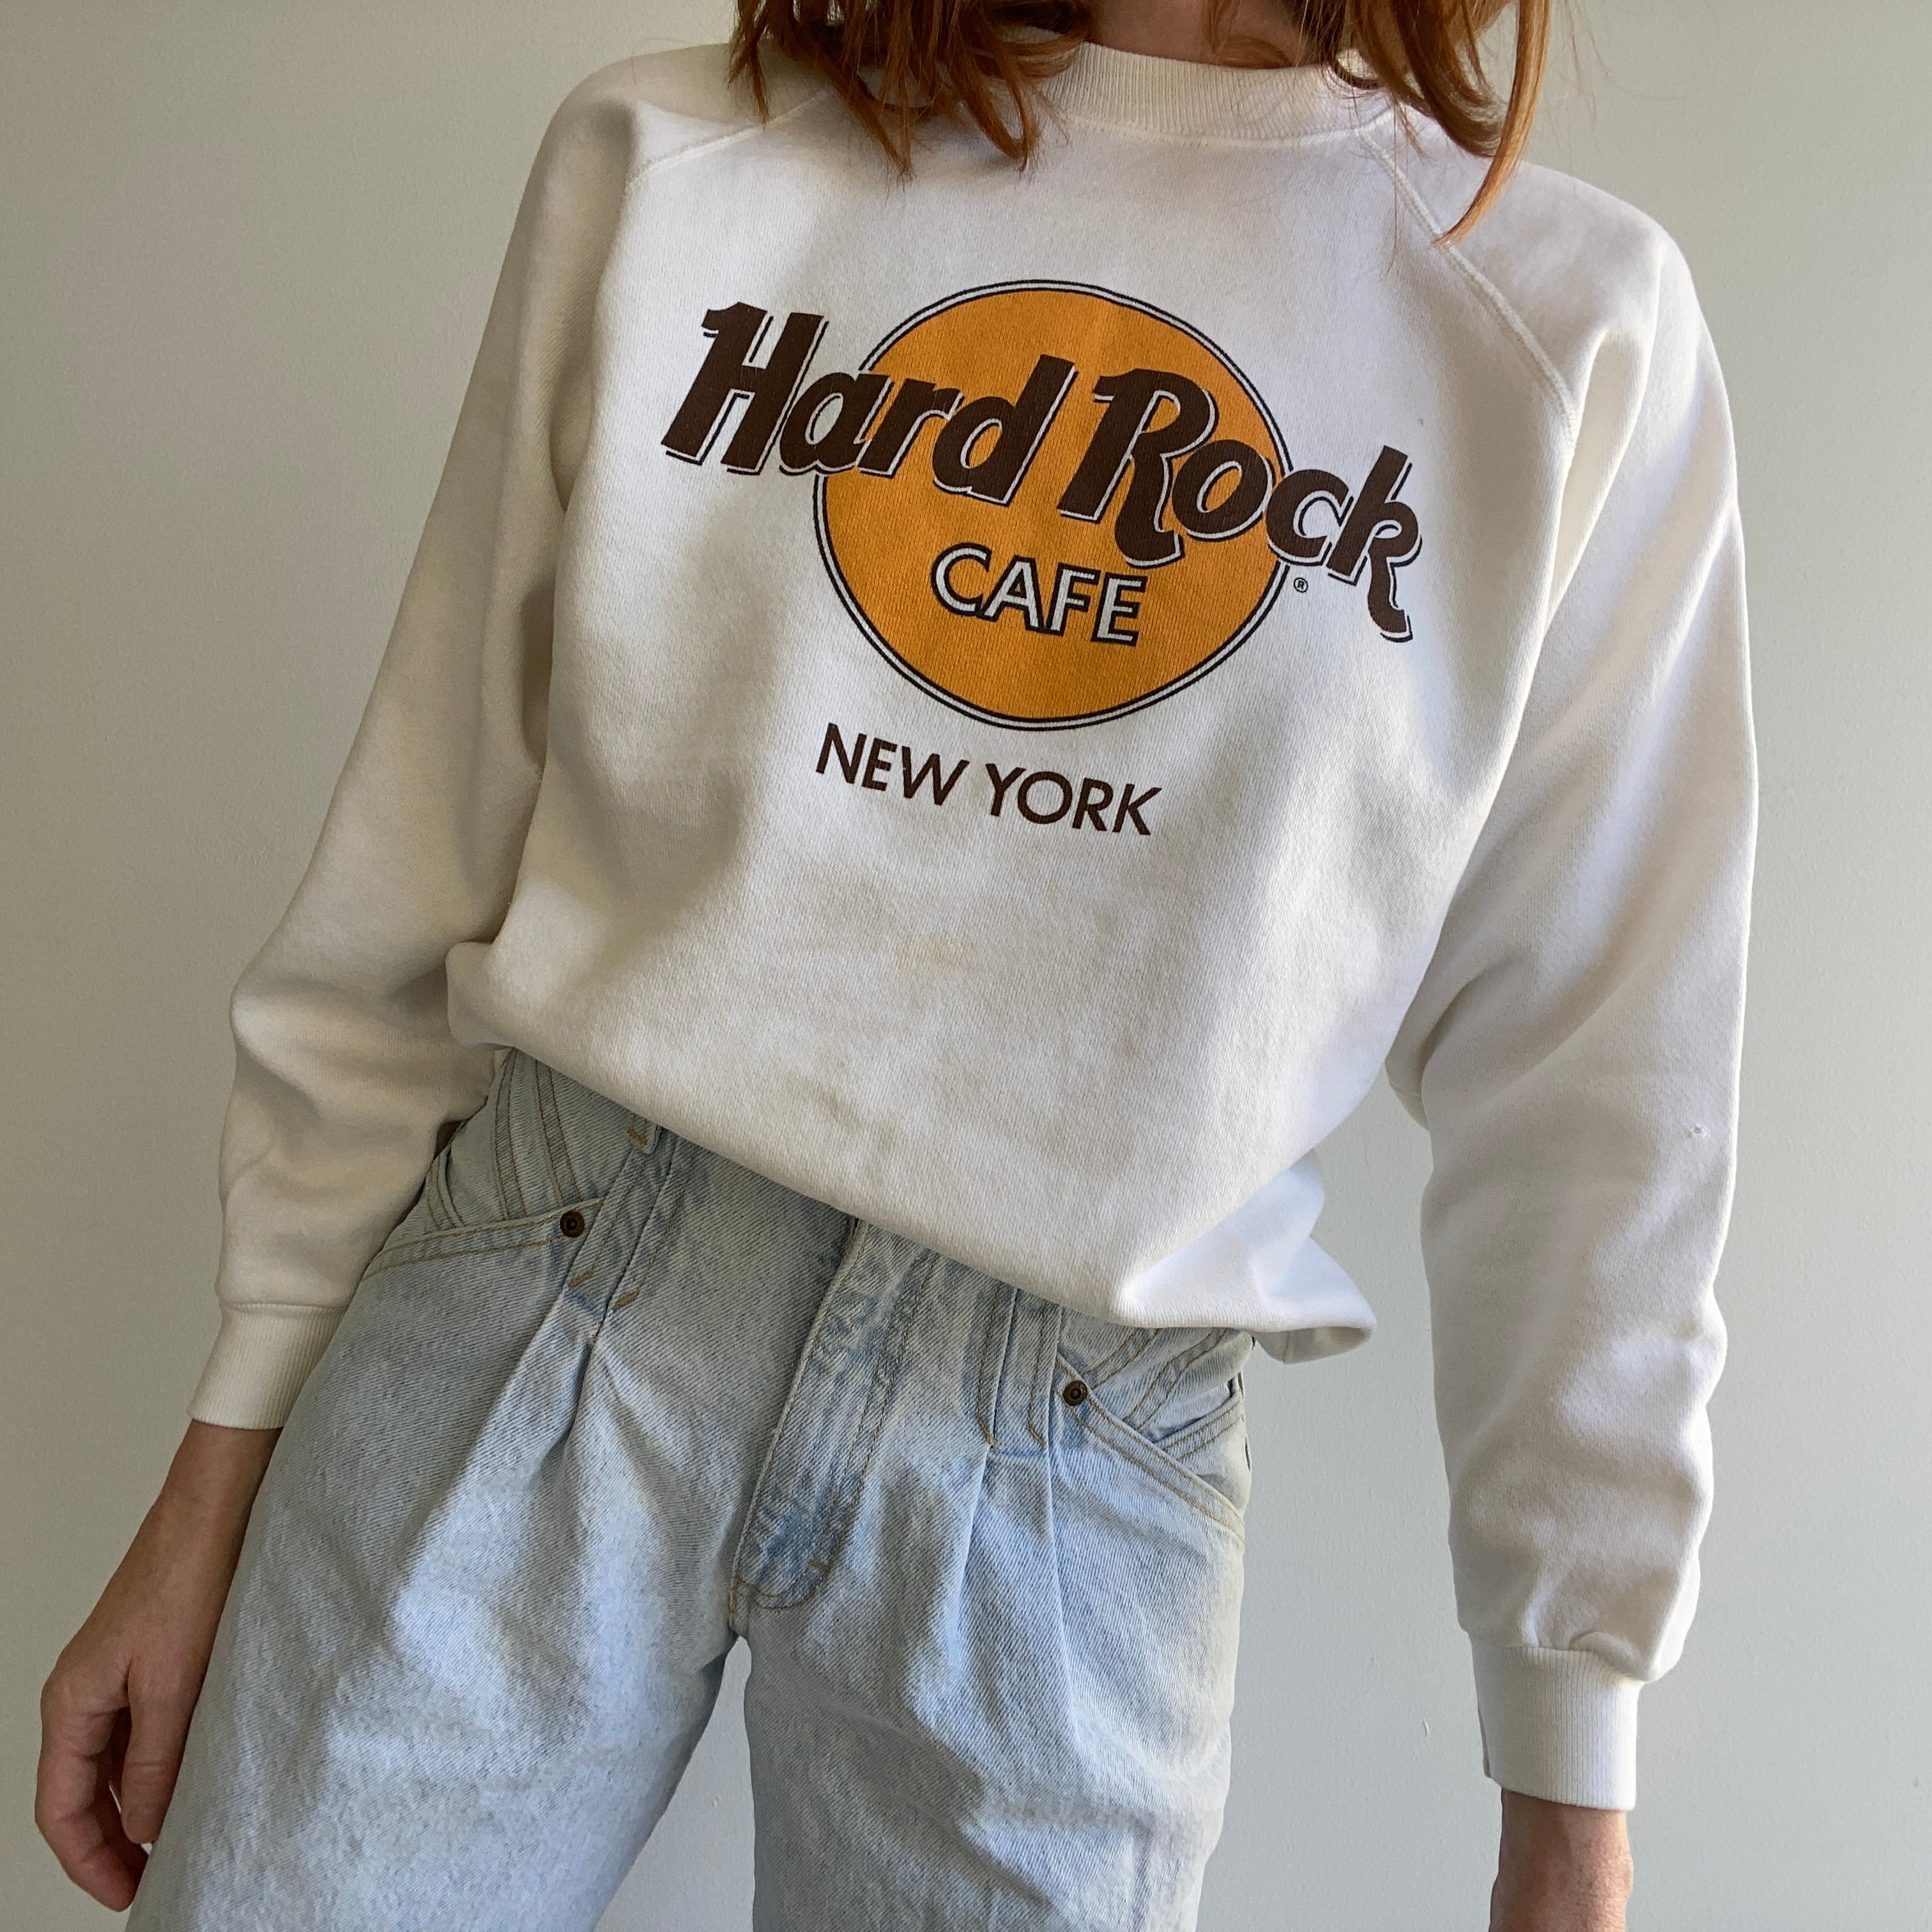 1990s Hard Rock Cafe - New York - Sweatshirt with Stains and Holes